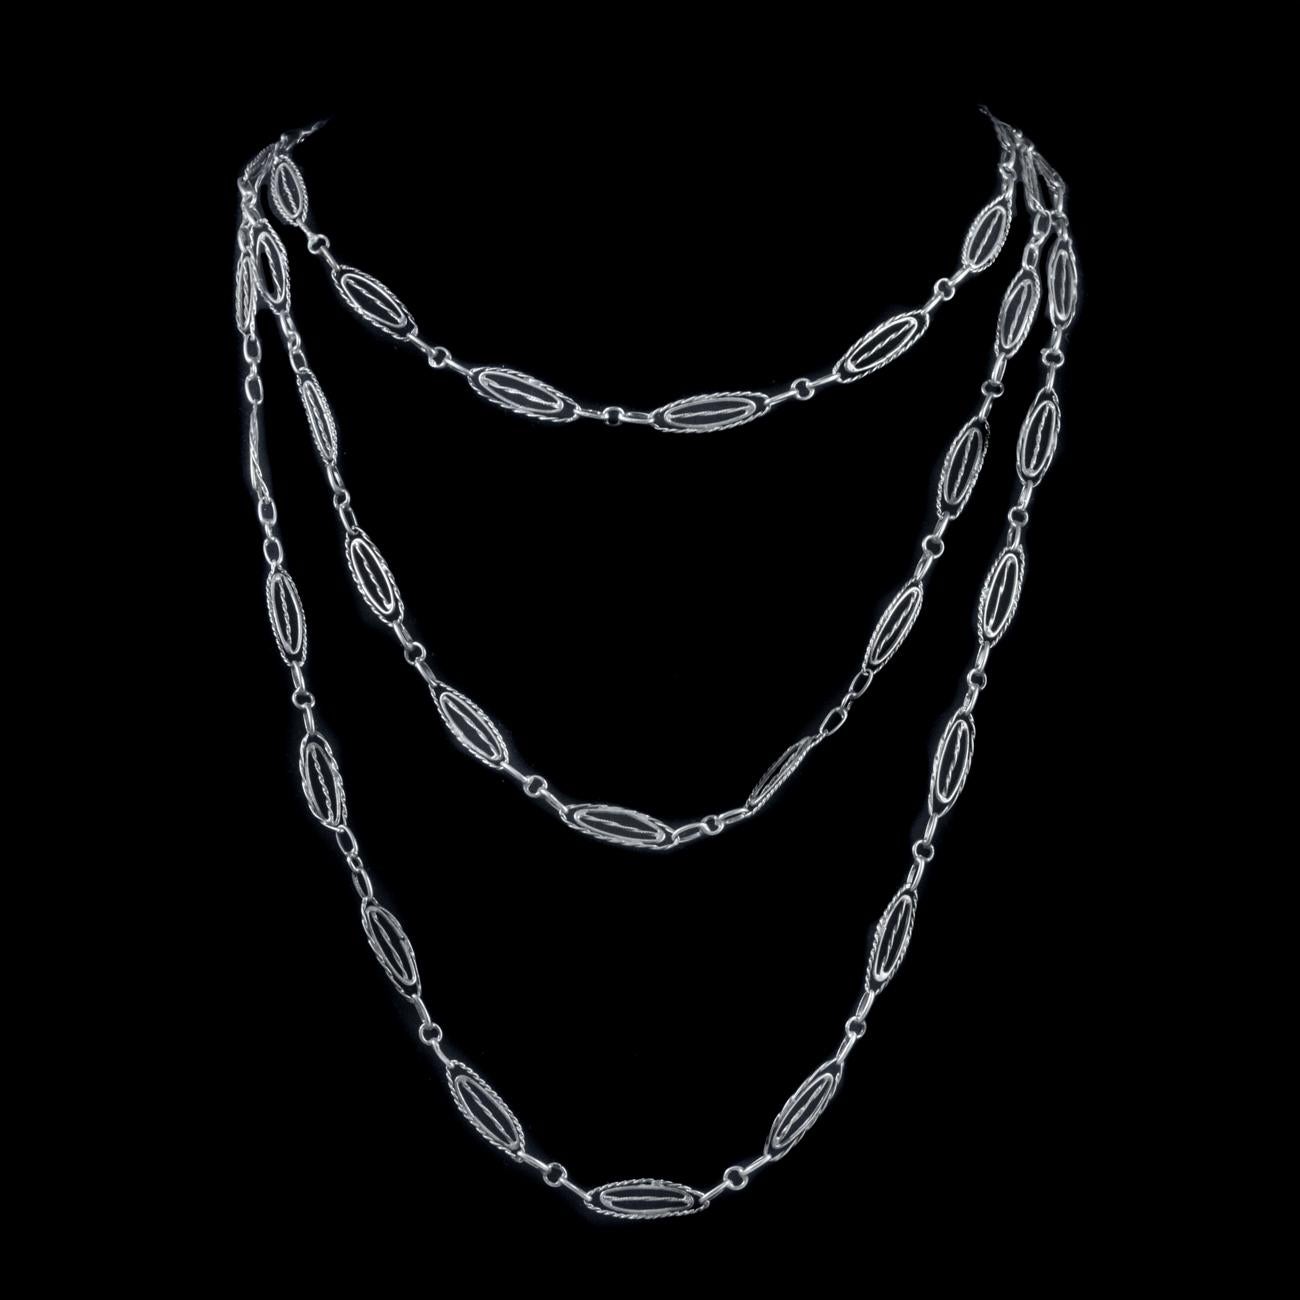 This beautiful Antique Victorian French guard chain has been commissioned in Silver. It features elaborate engraved double oval links spaced around the chain.

The chain features a large spring ring clasp to attach a pendant.

A lovely chain which